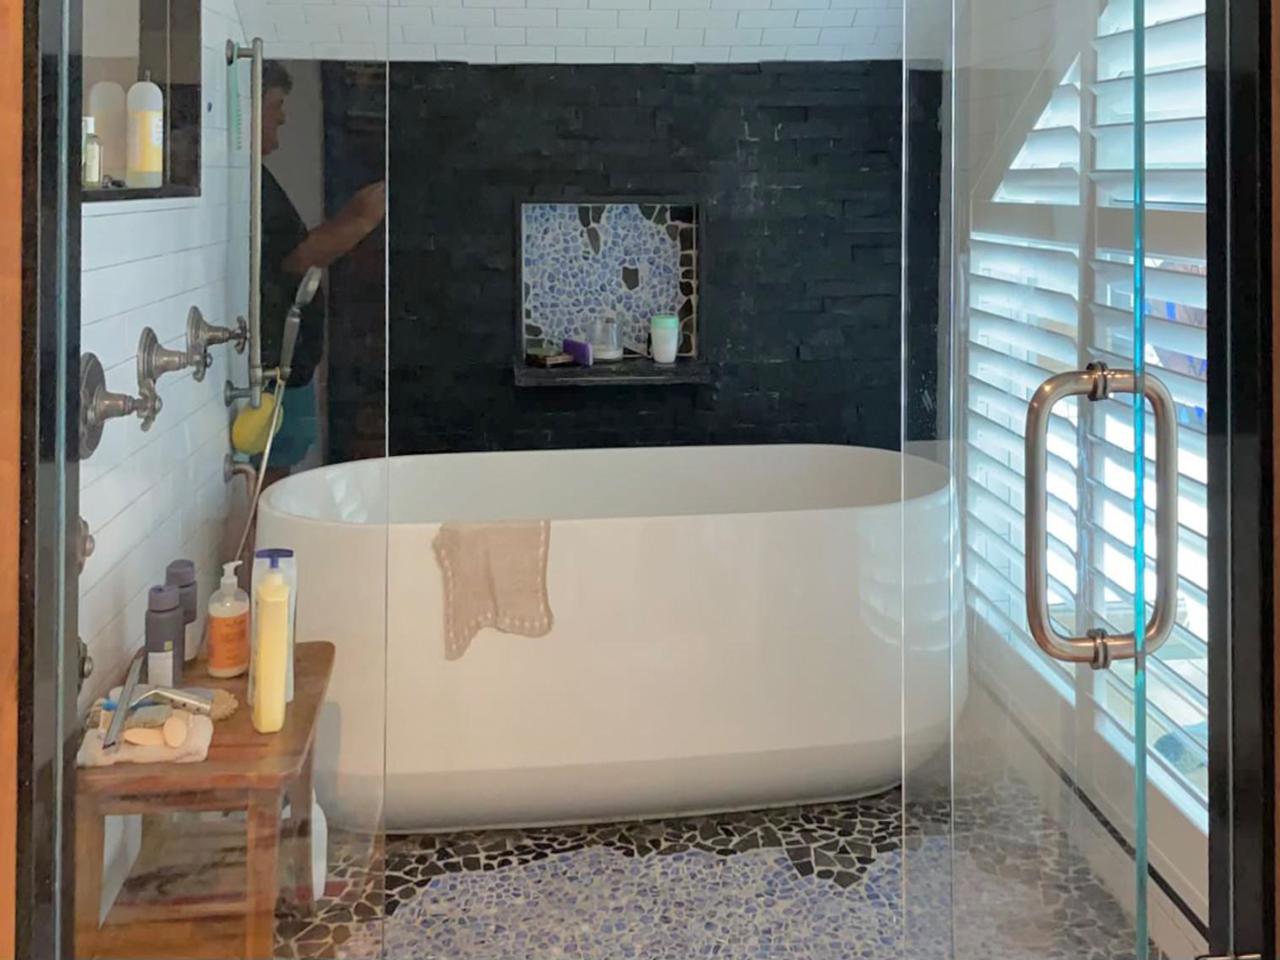 Tub and Shower with Louverwood shutters